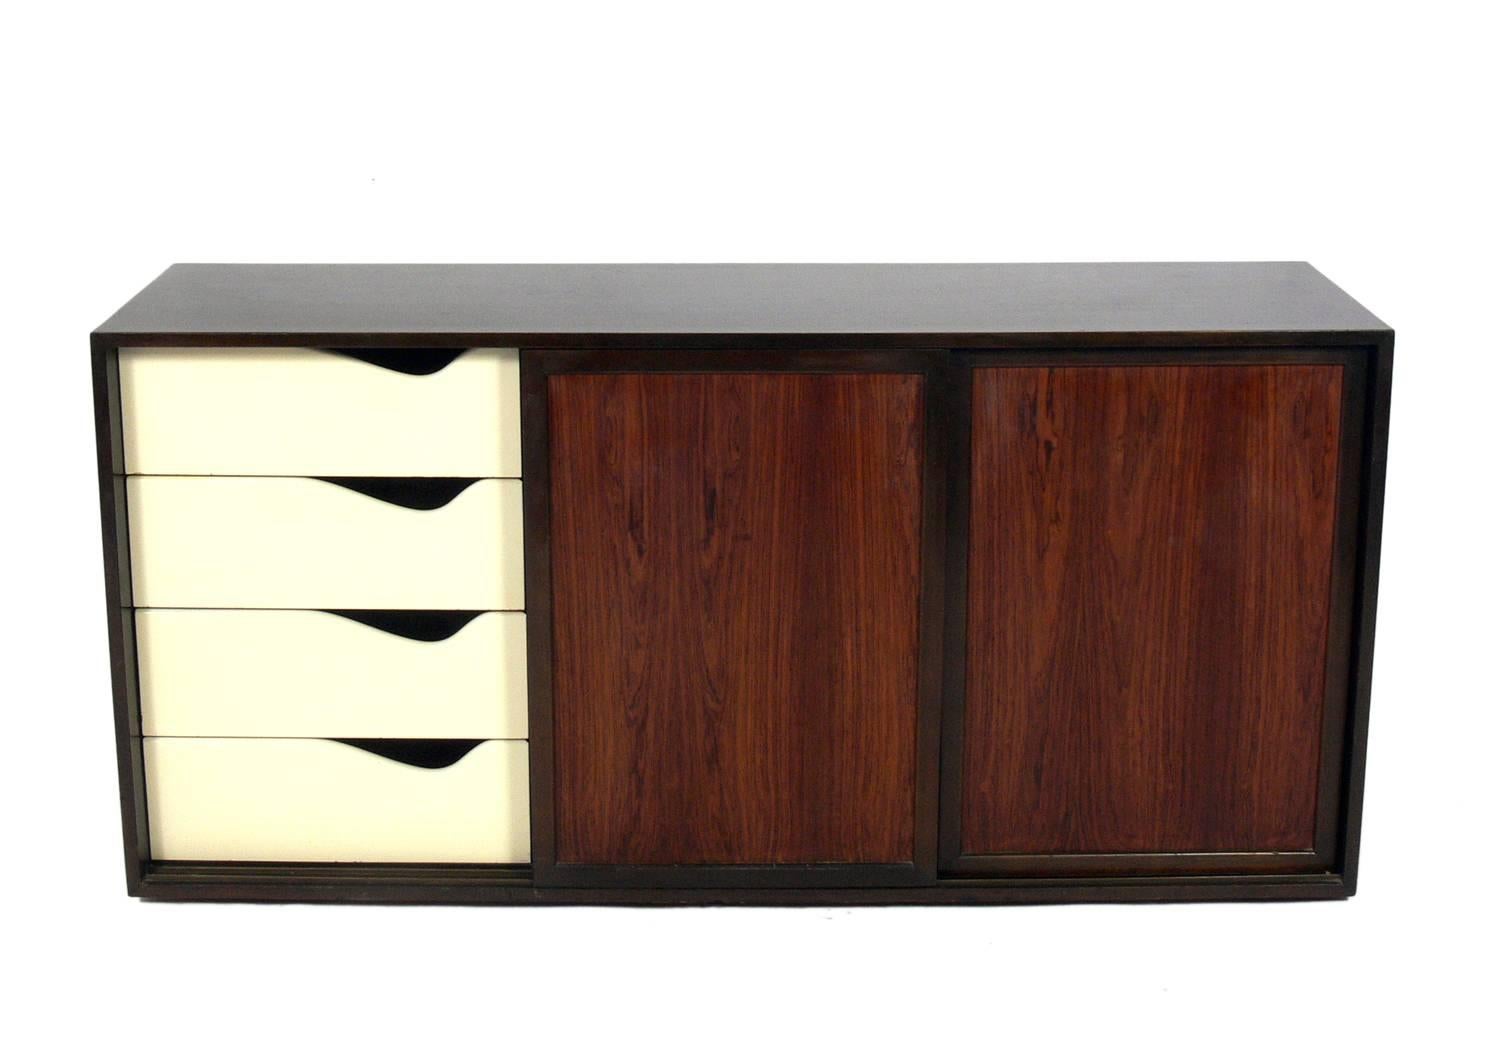 Modern rosewood chest or credenza, designed by Harvey Probber, American, circa 1960s. It is a versatile size and can be used as a credenza, cabinet, or bar in a living area, or as a chest or dresser in a bedroom. It offers a voluminous amount of